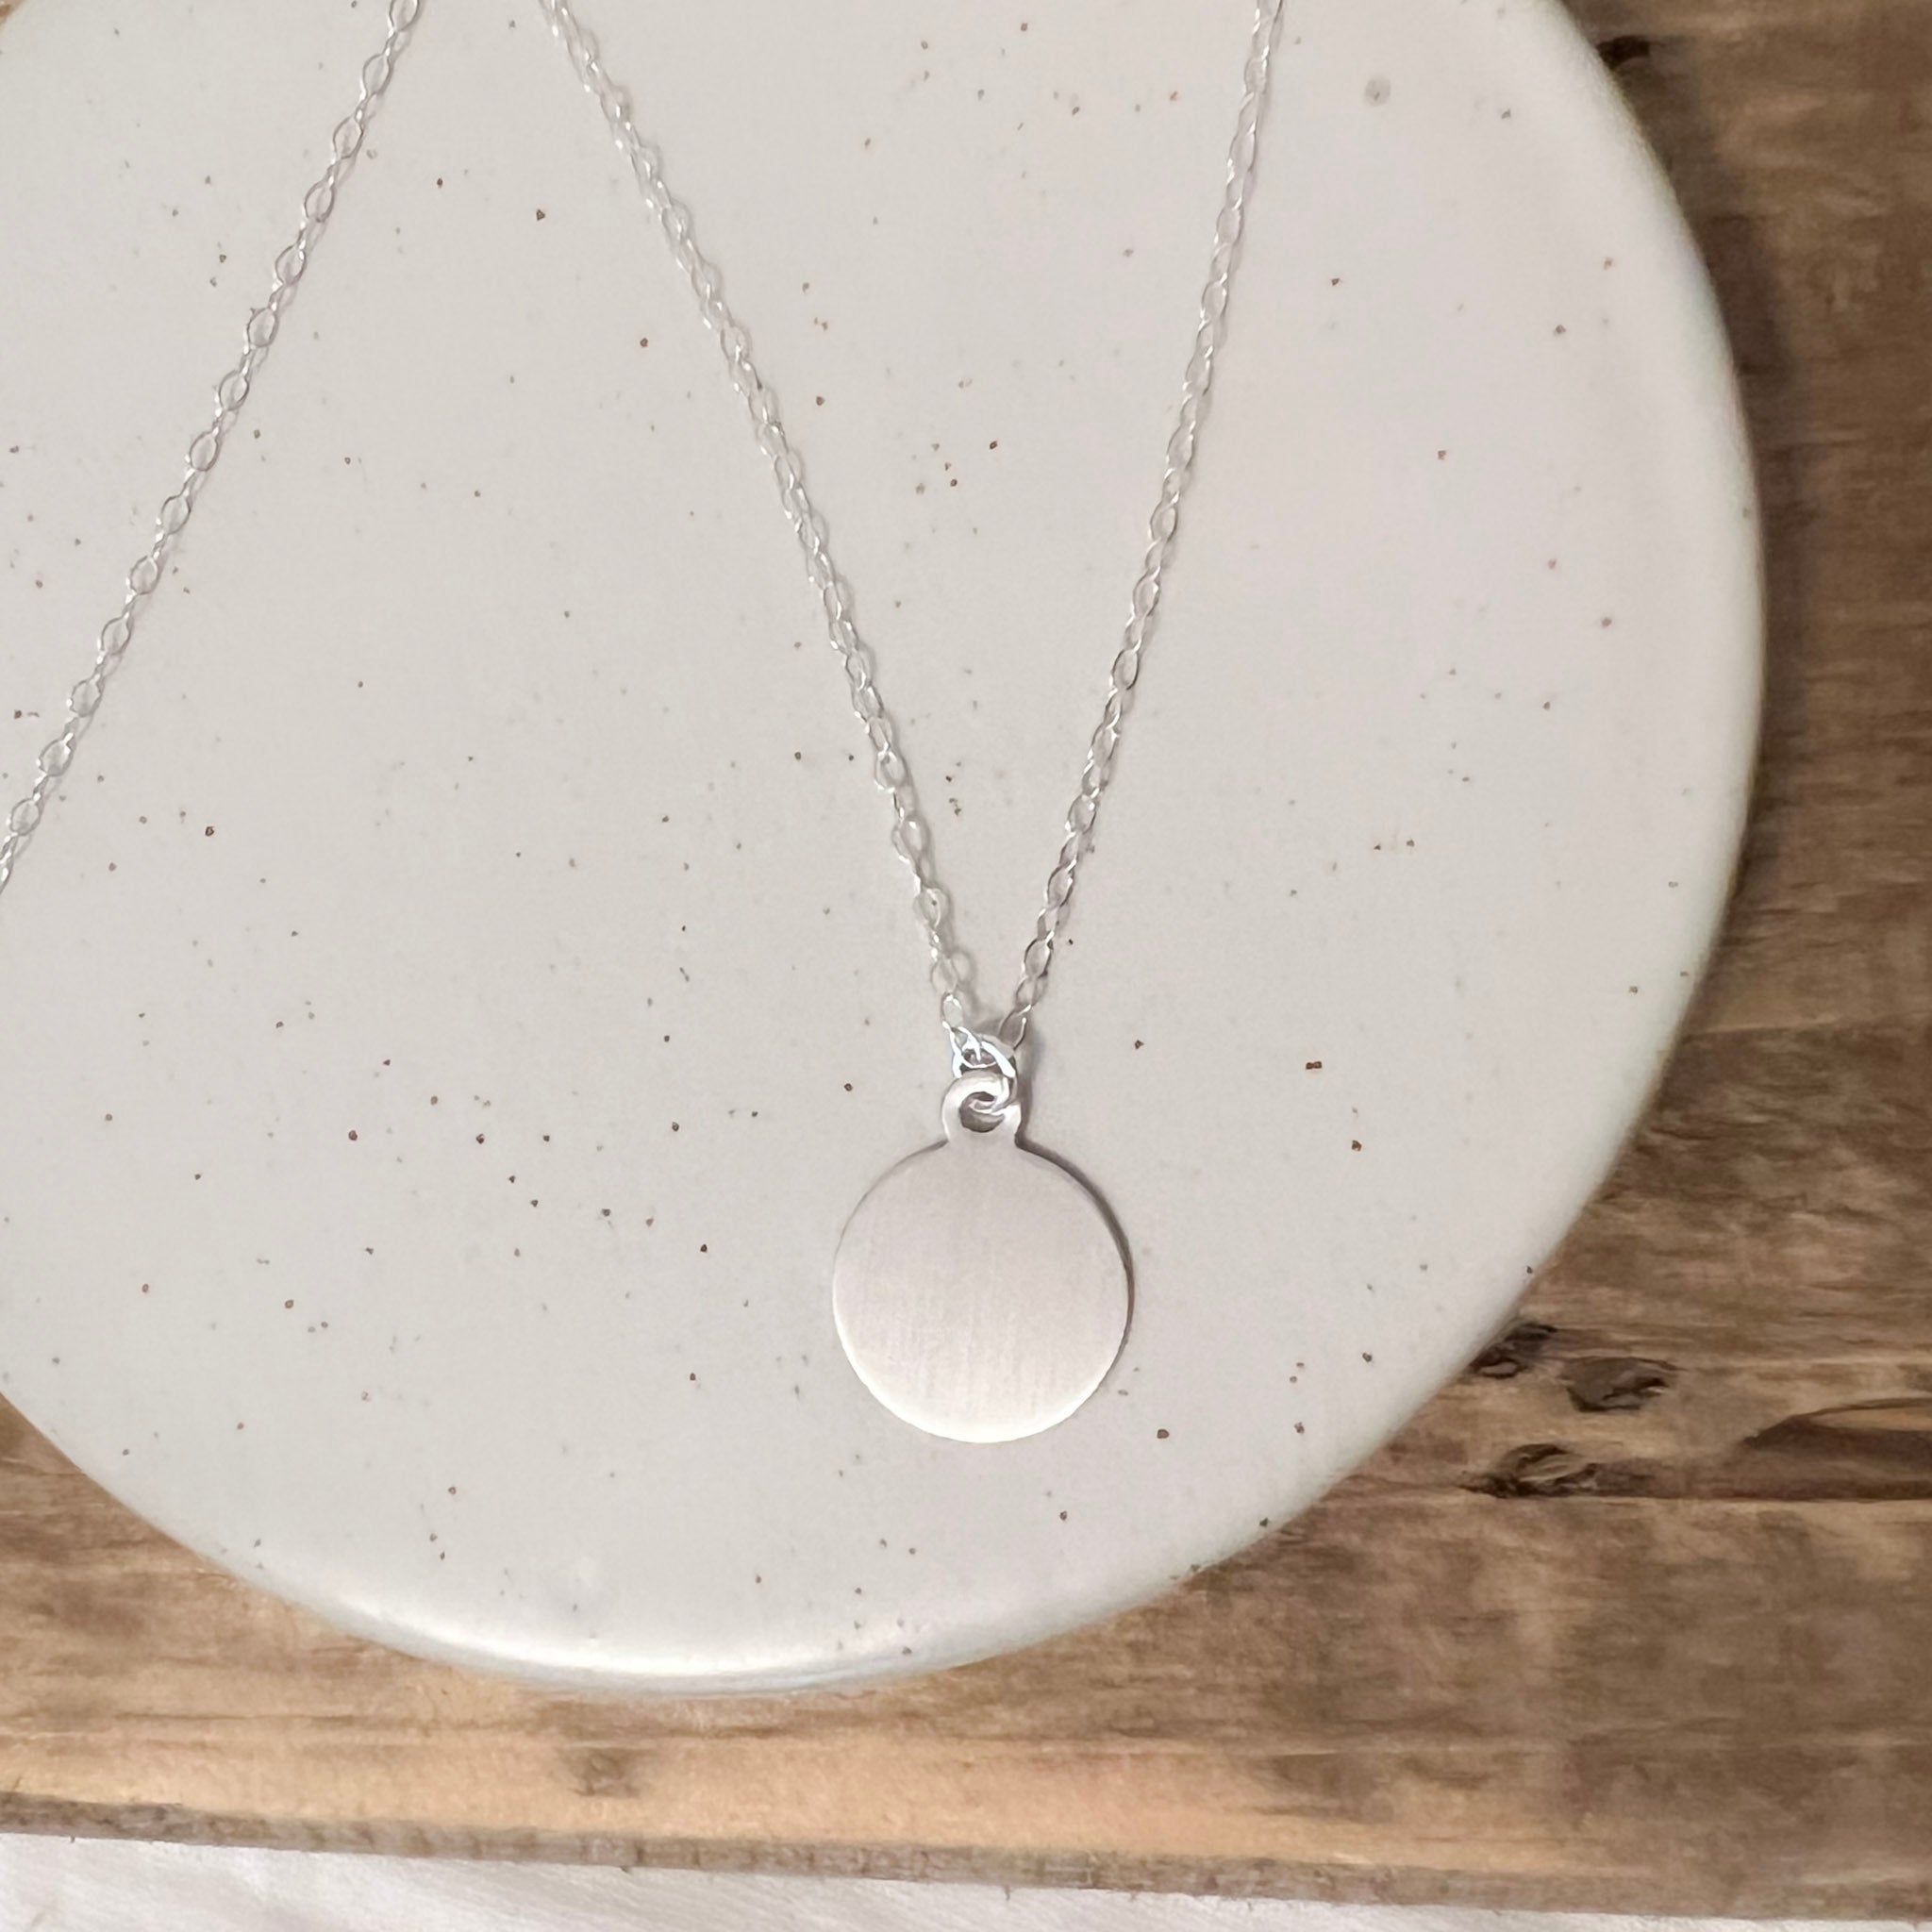 Large, Satin Circle Pendant Necklace - GF or Sterling Silver - Sela+Sage - Pendant/Charm Necklace